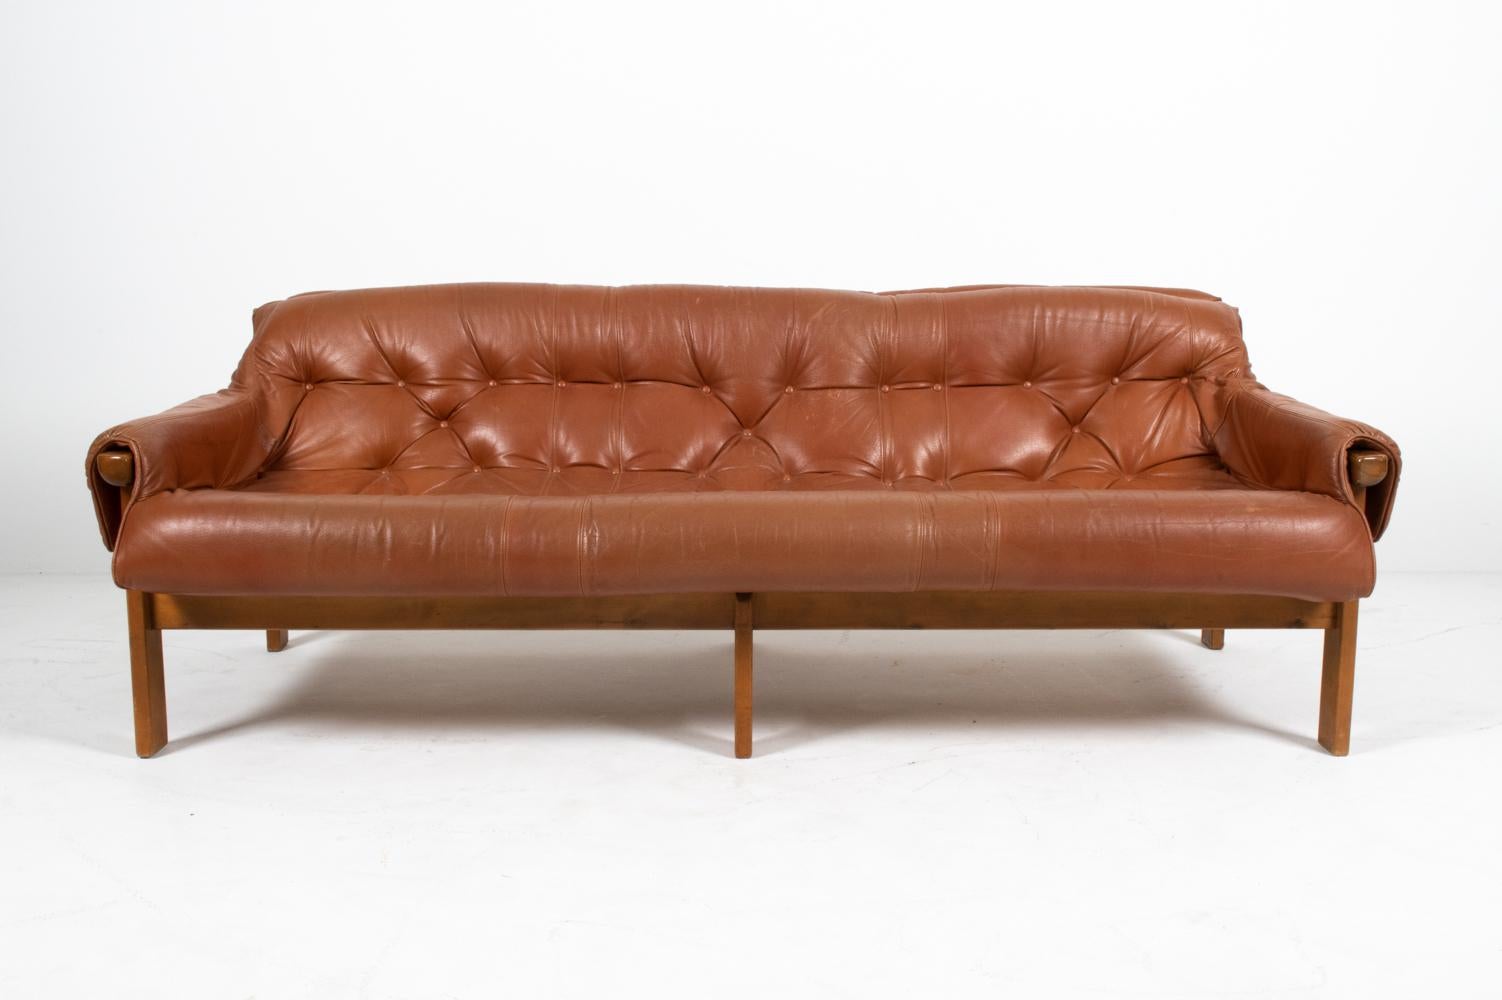 70s wood frame couch for sale